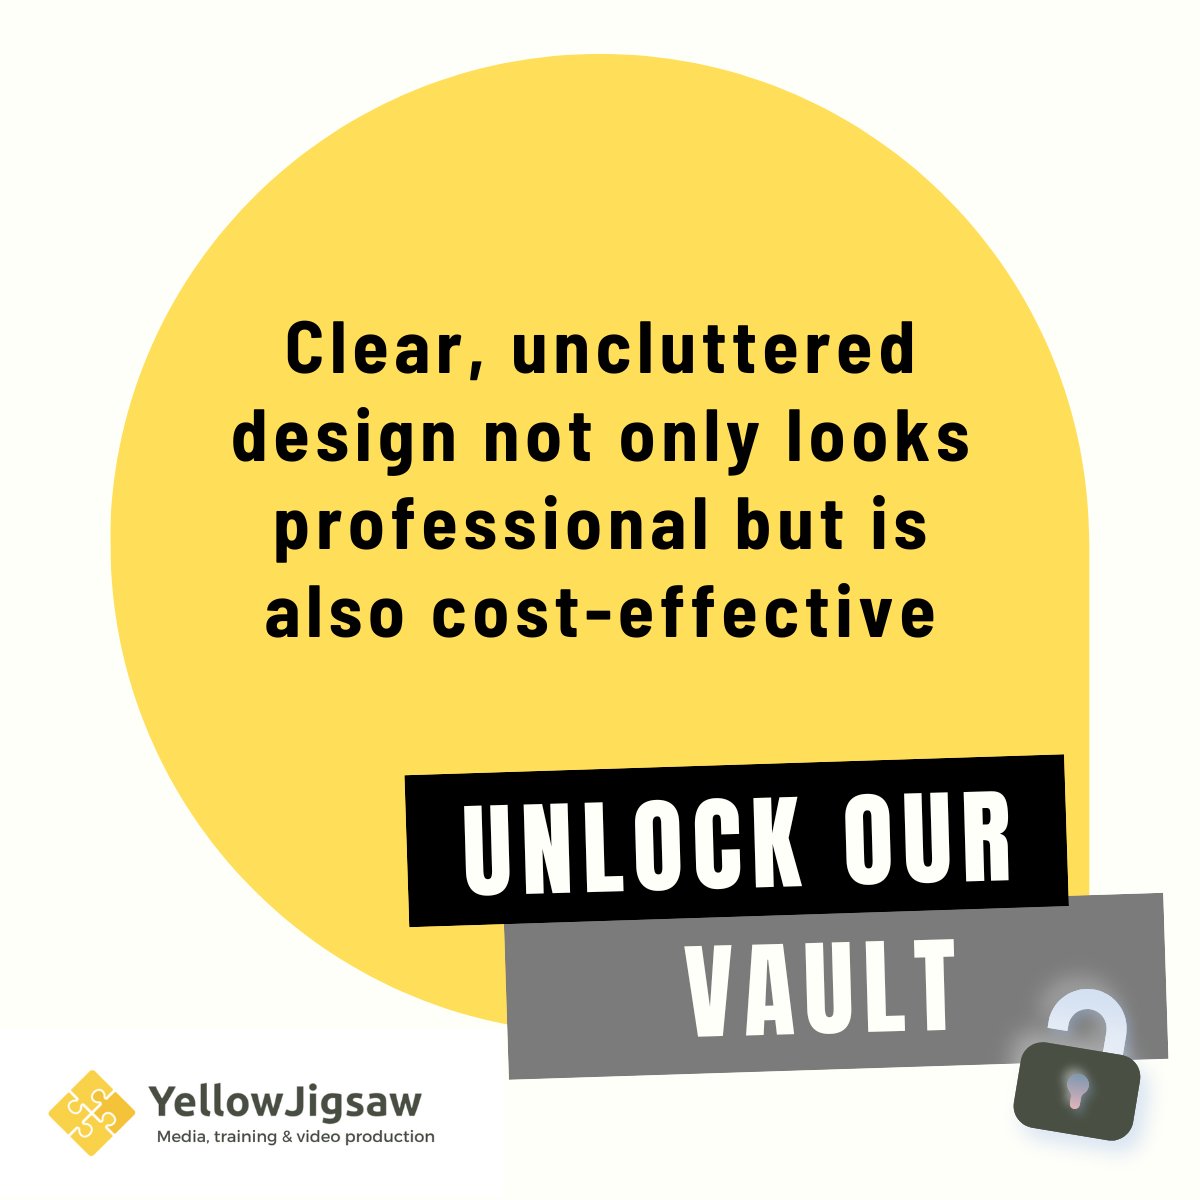 Did you know that simplicity is key? You don't need a big budget to yield impressive results. Your media journey begins now. Access our vault of free expert guides and ignite your inner star to make media waves in your industry today! 🚀 yellowjigsaw.co.uk/vault/